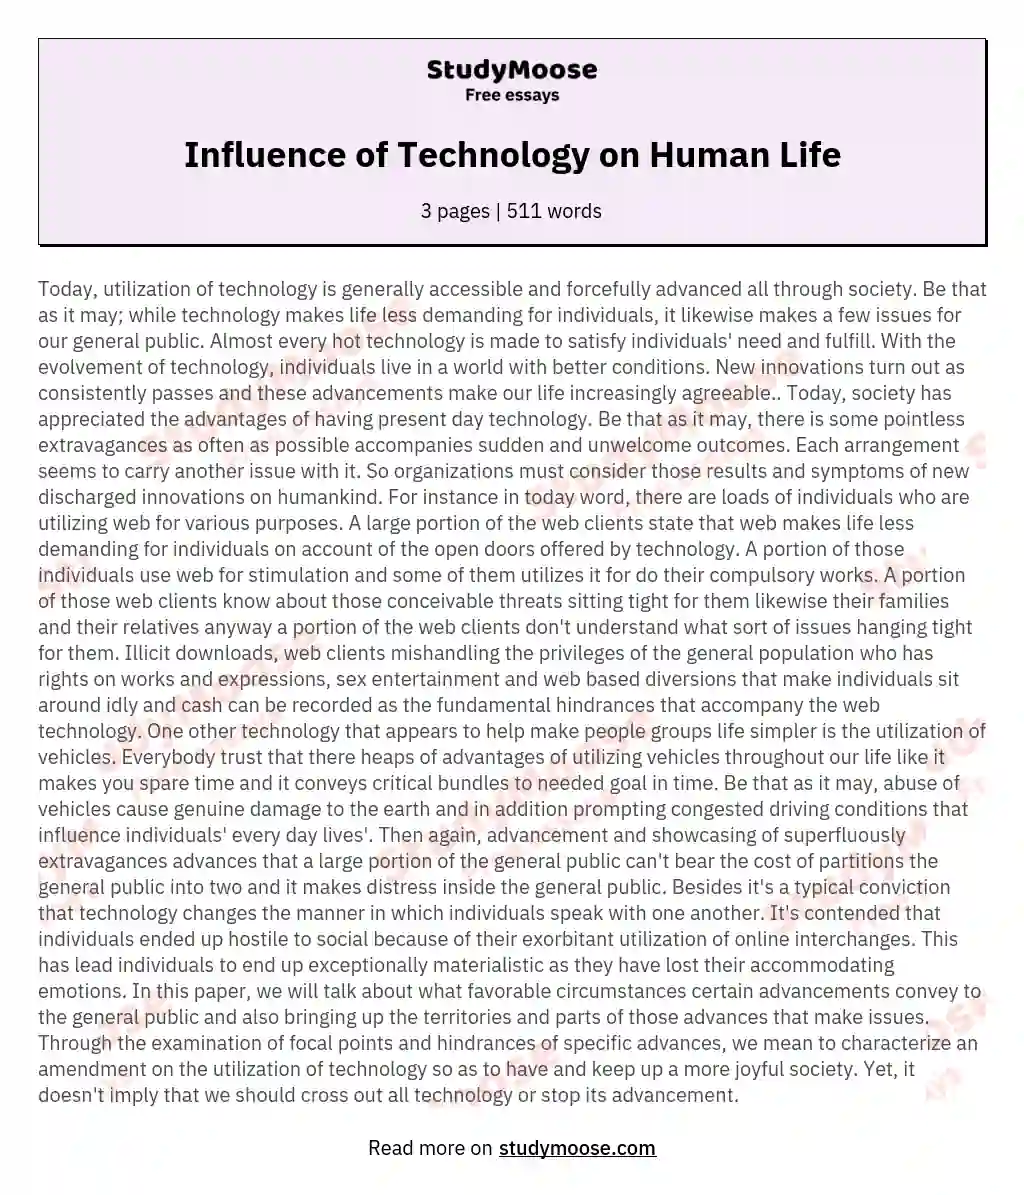 Influence of Technology on Human Life essay